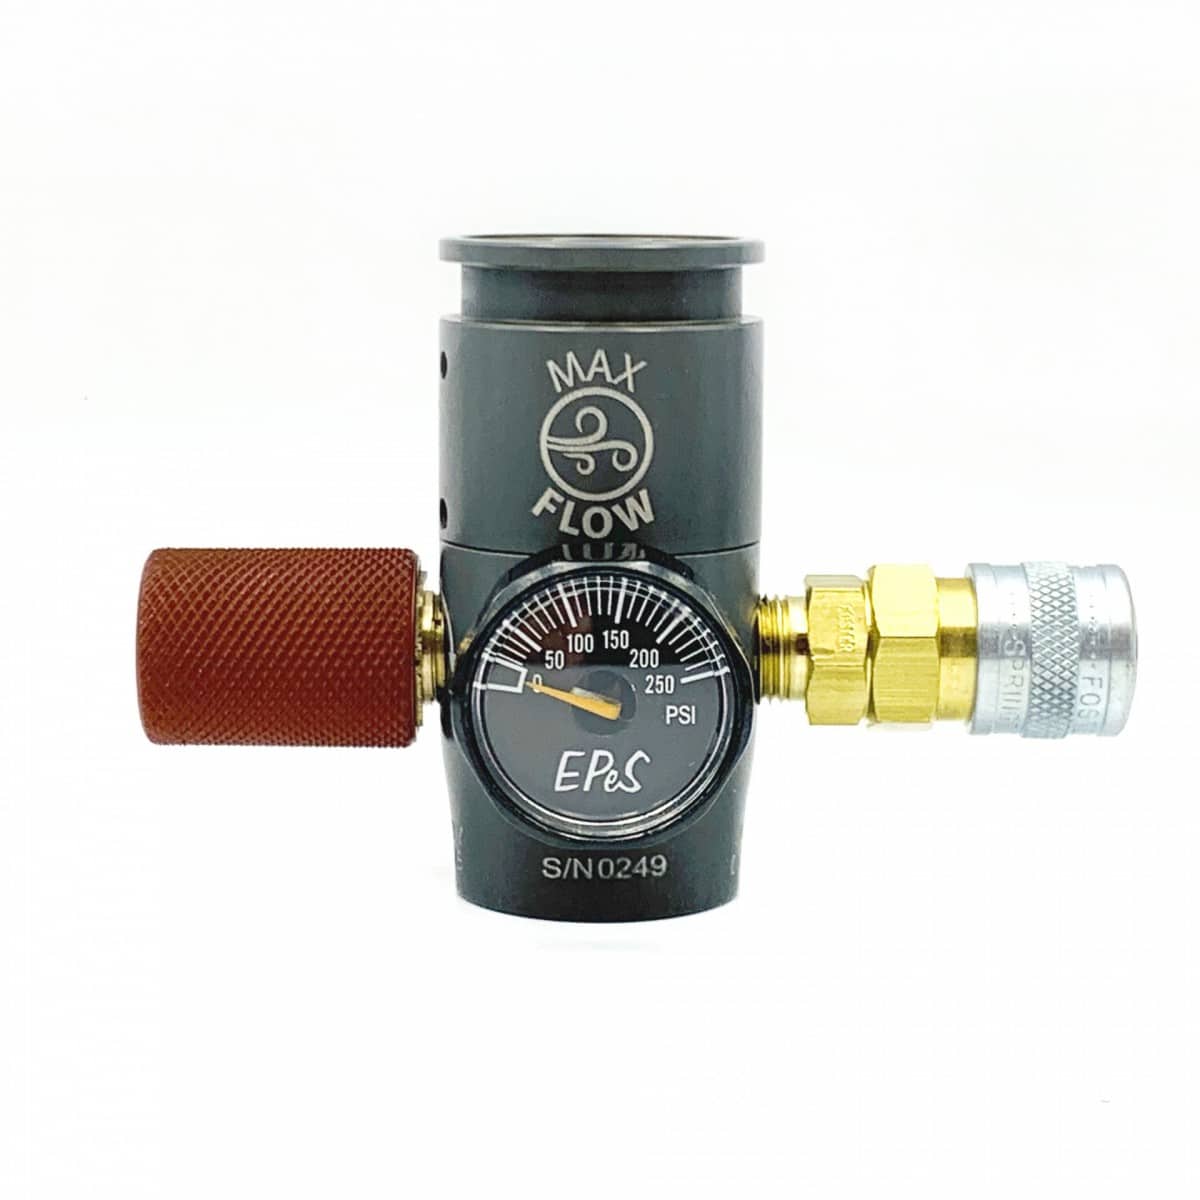 EPES Max Flow HPA low pressure regulator